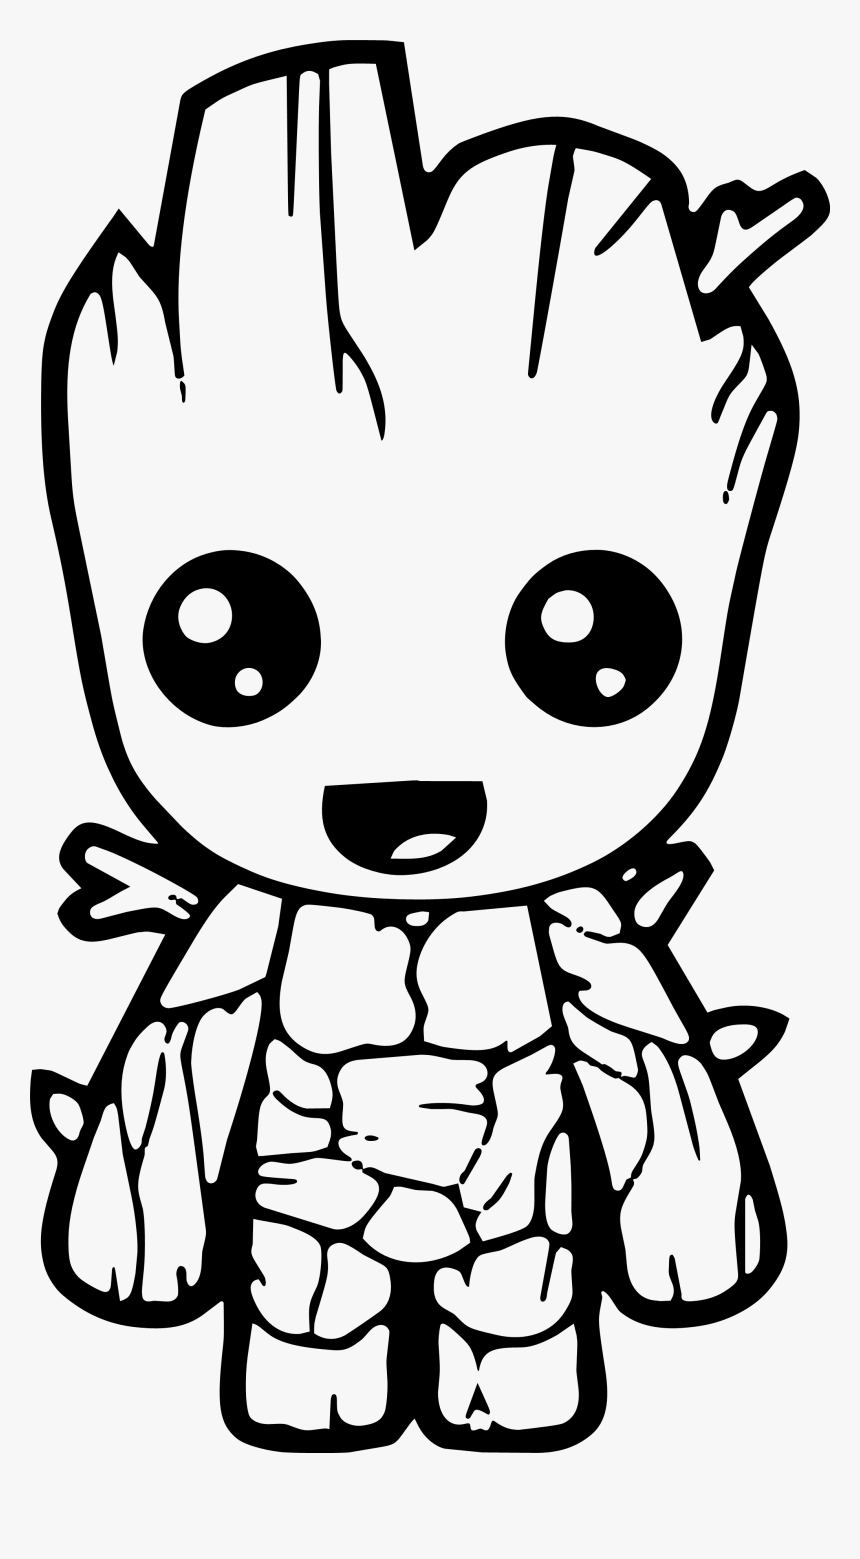 Download Cute Superhero Coloring Pages, HD Png Download - kindpng